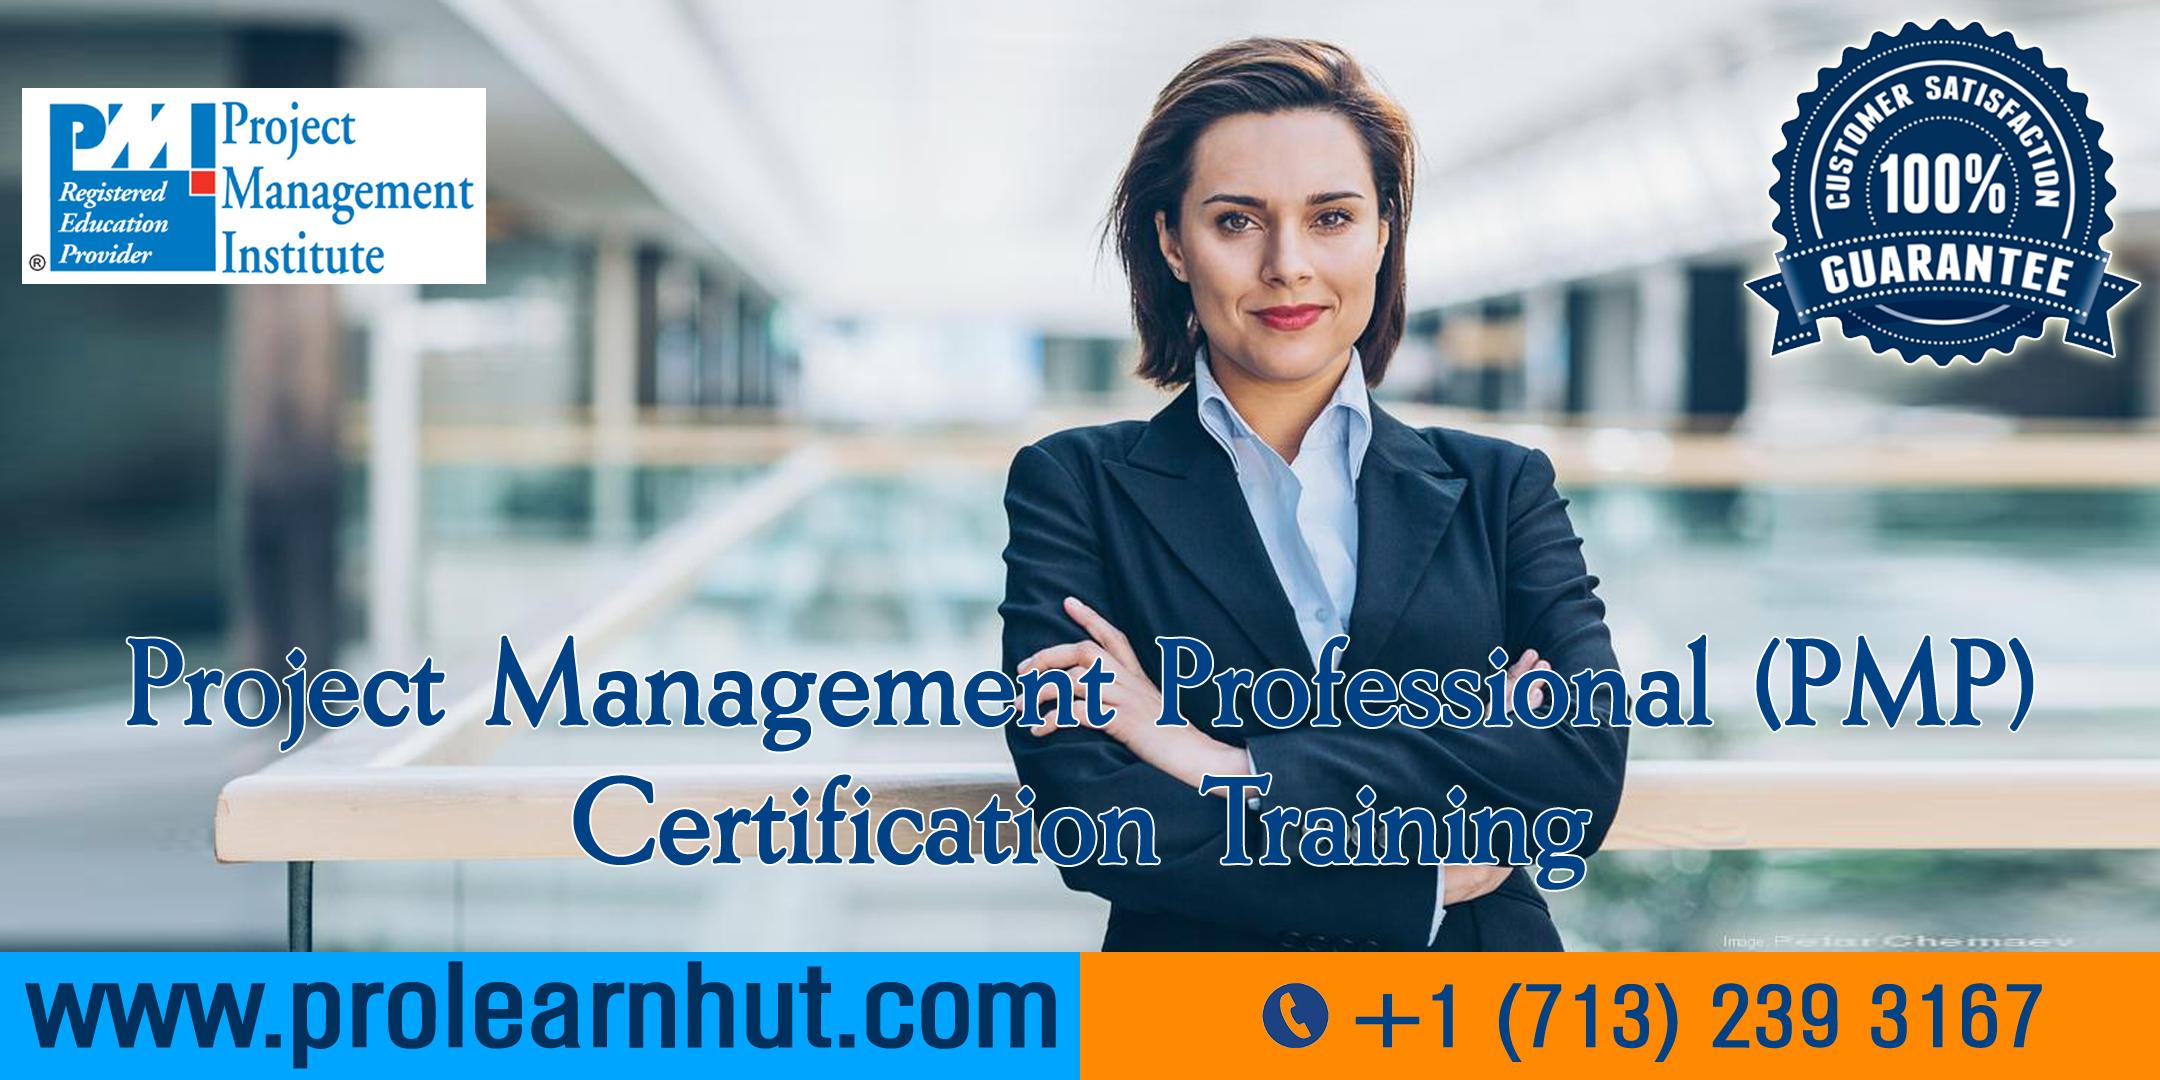 PMP Certification | Project Management Certification| PMP Training in Sandy Springs, GA | ProLearnHut